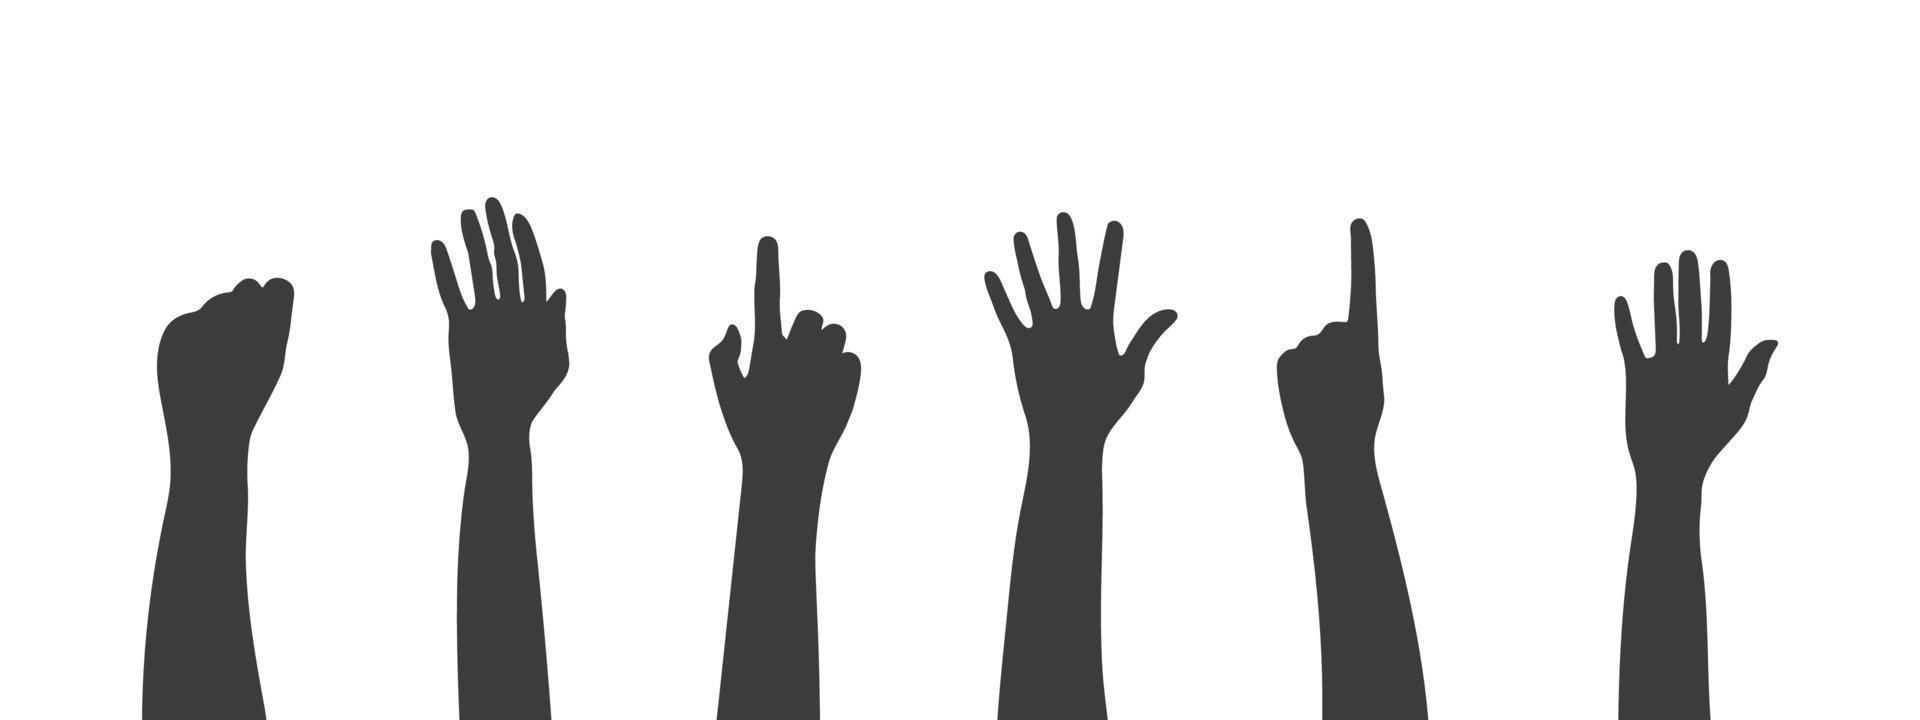 Different silhouettes hands. Black human hands. Arms and hands raised. Vector illustration